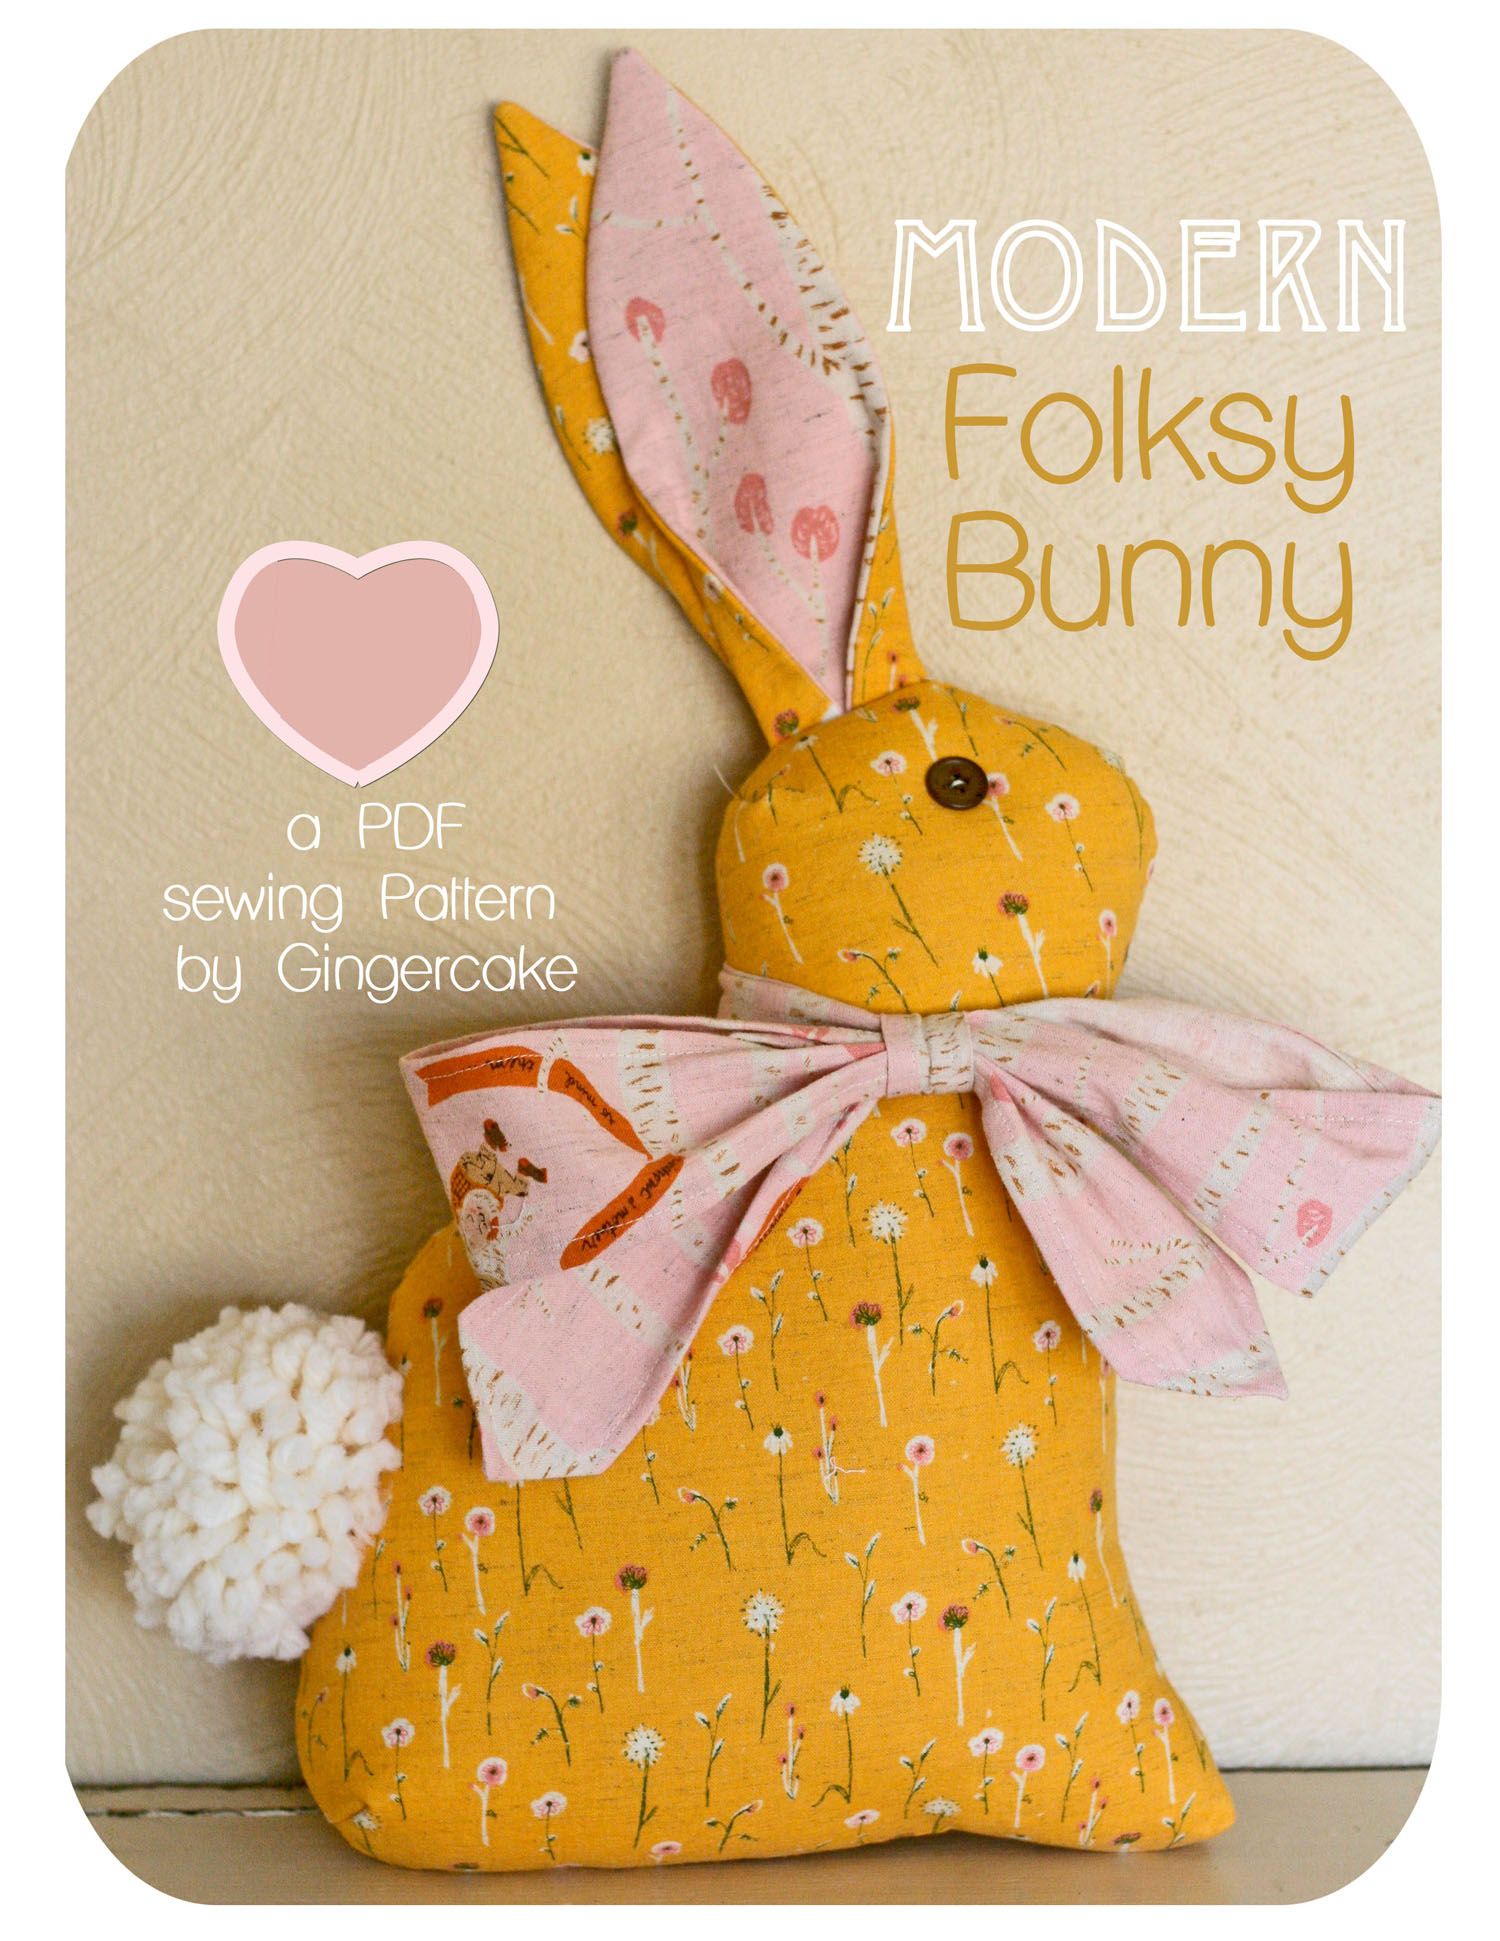 Get Free Bunny Patterns To Sew Images - Simasbos